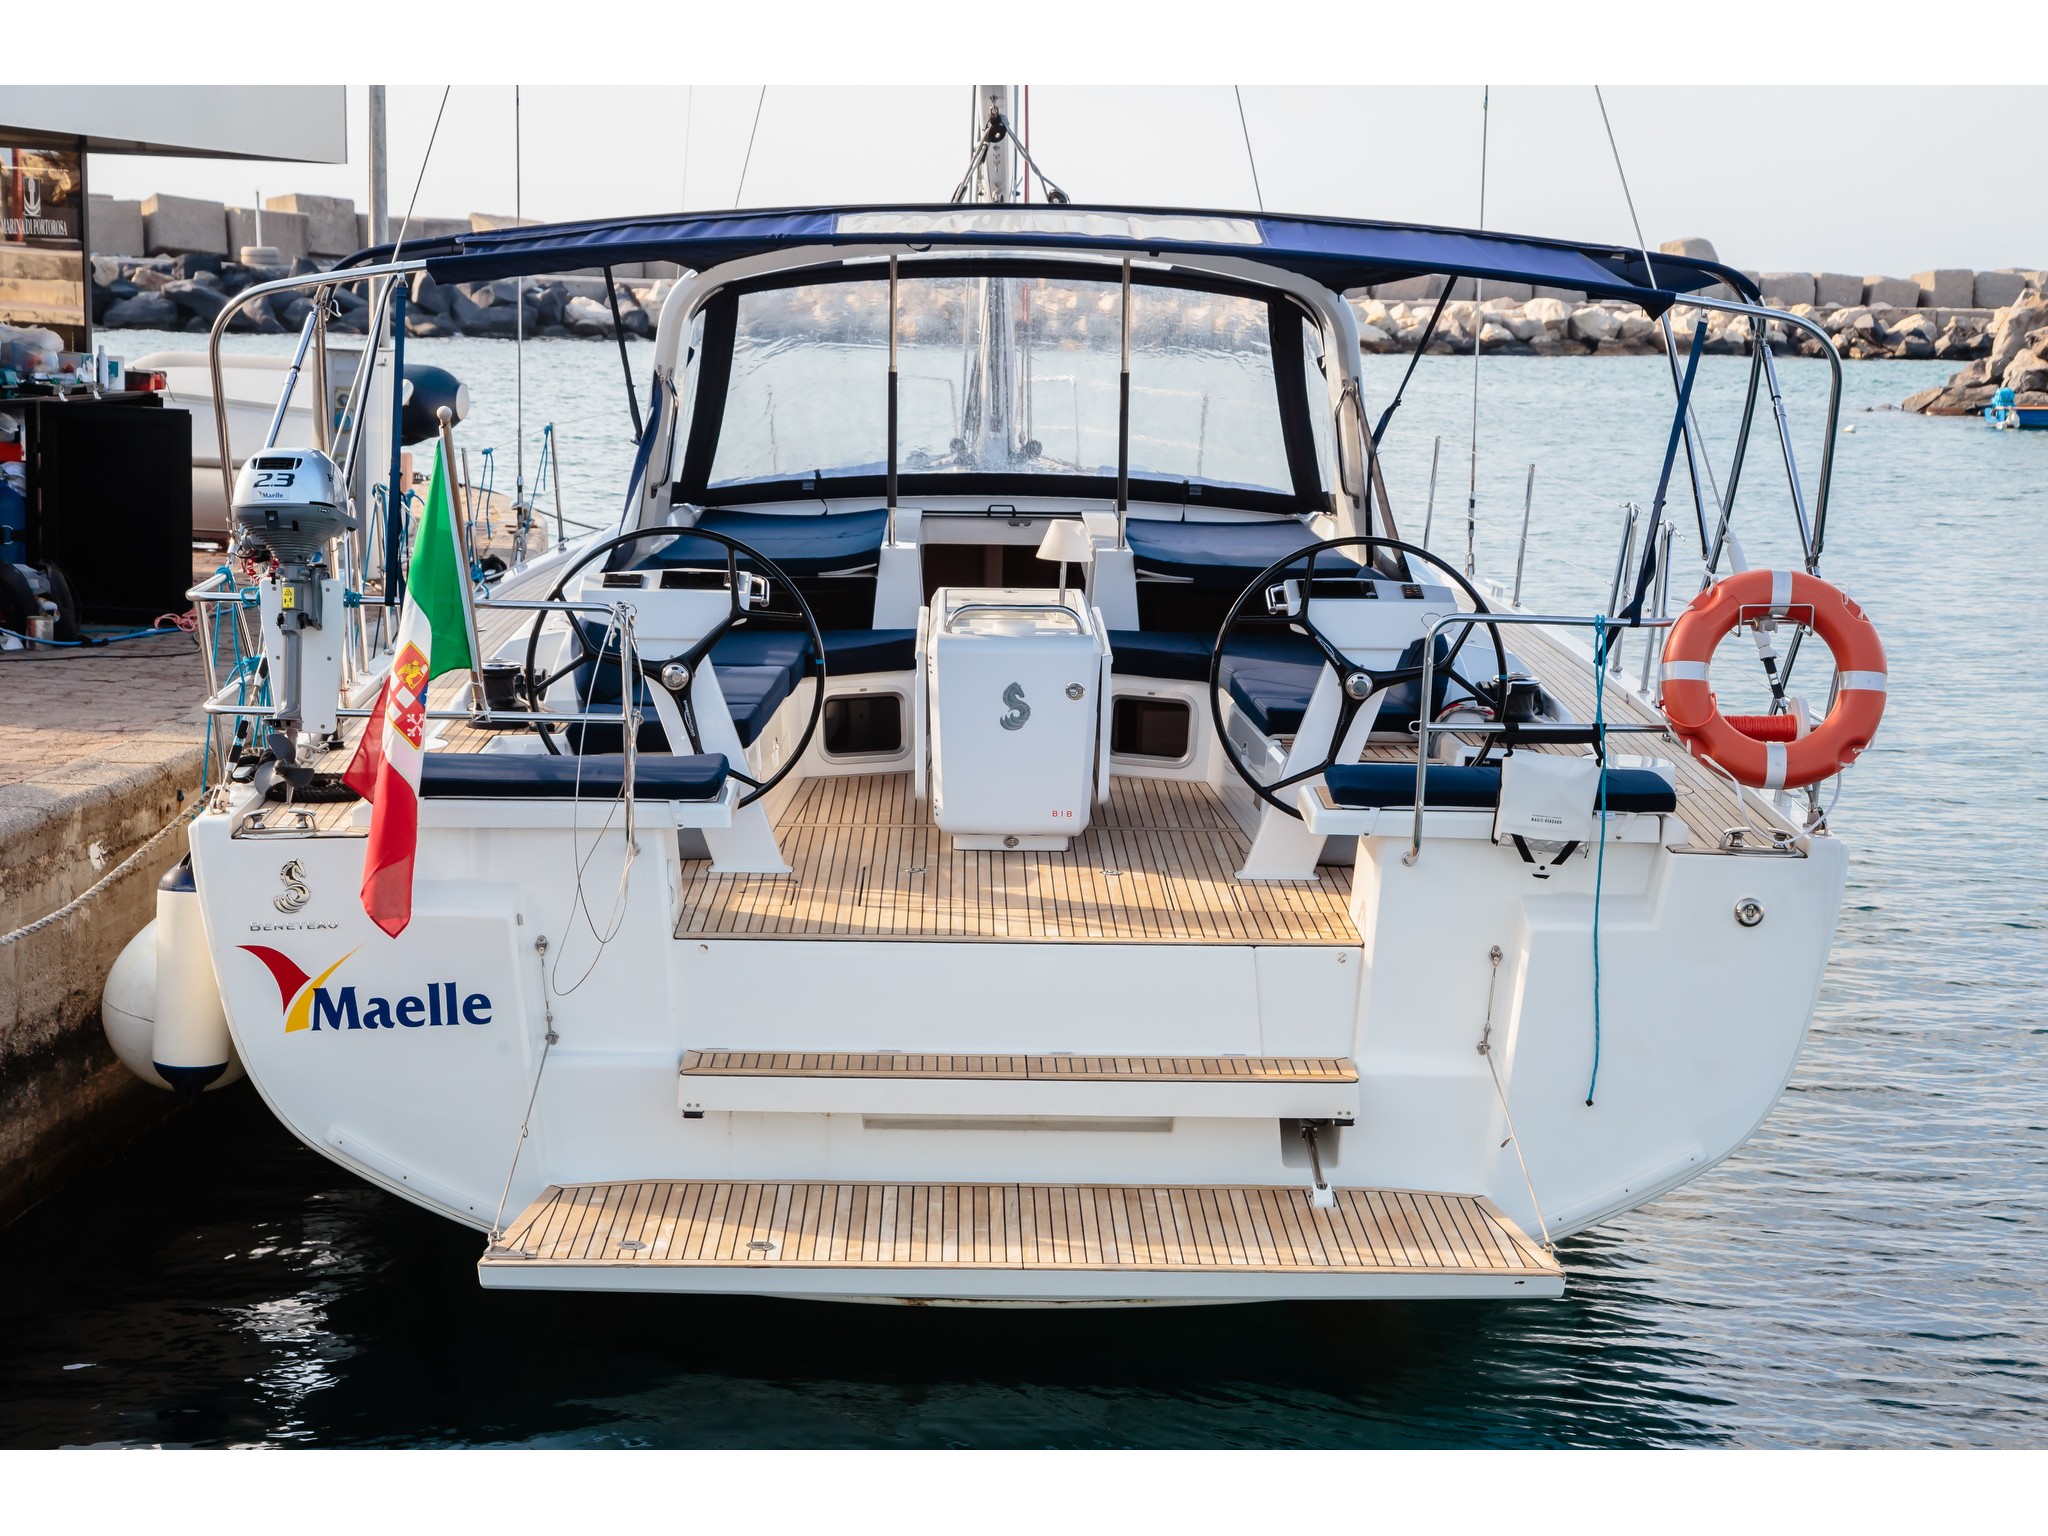 Oceanis 51.1 - Yacht Charter Trapani & Boat hire in Italy Sicily Aegadian Islands Trapani Trapani 2